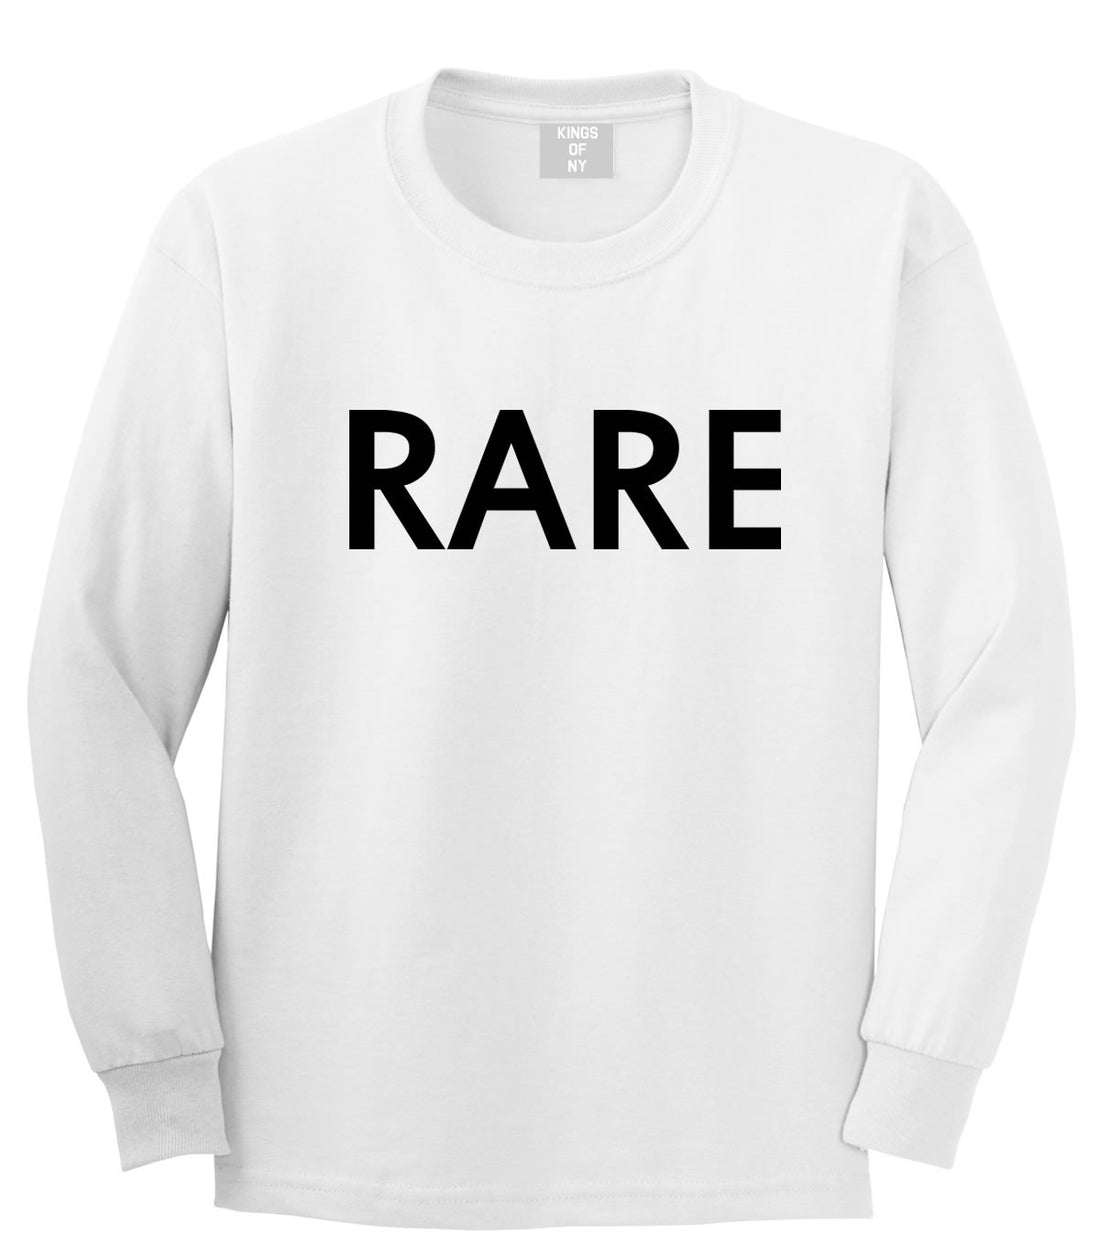 Kings Of NY Rare Long Sleeve T-Shirt in White